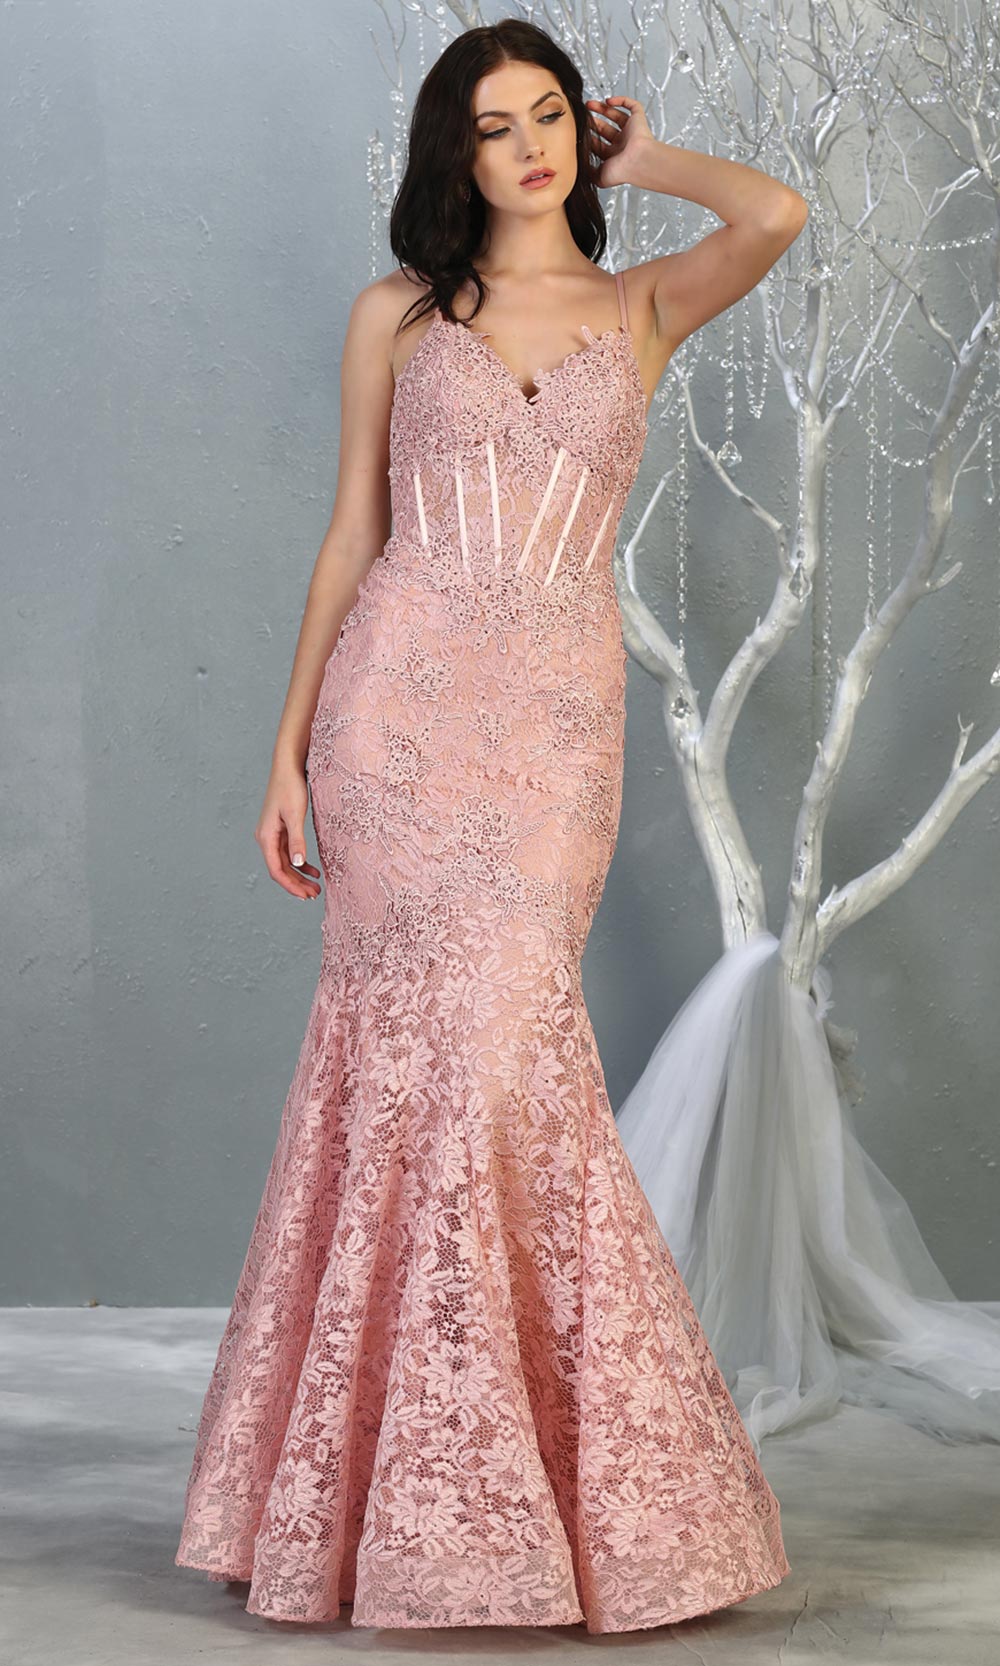 Mayqueen RQ7865 long dusty rose v neck evening mermaid dress w/straps. Full length dusty rose lace gown is perfect for  enagagement/e-shoot dress, formal wedding guest, evening party dress, prom, engagement, wedding reception. Plus sizes avail.jpg